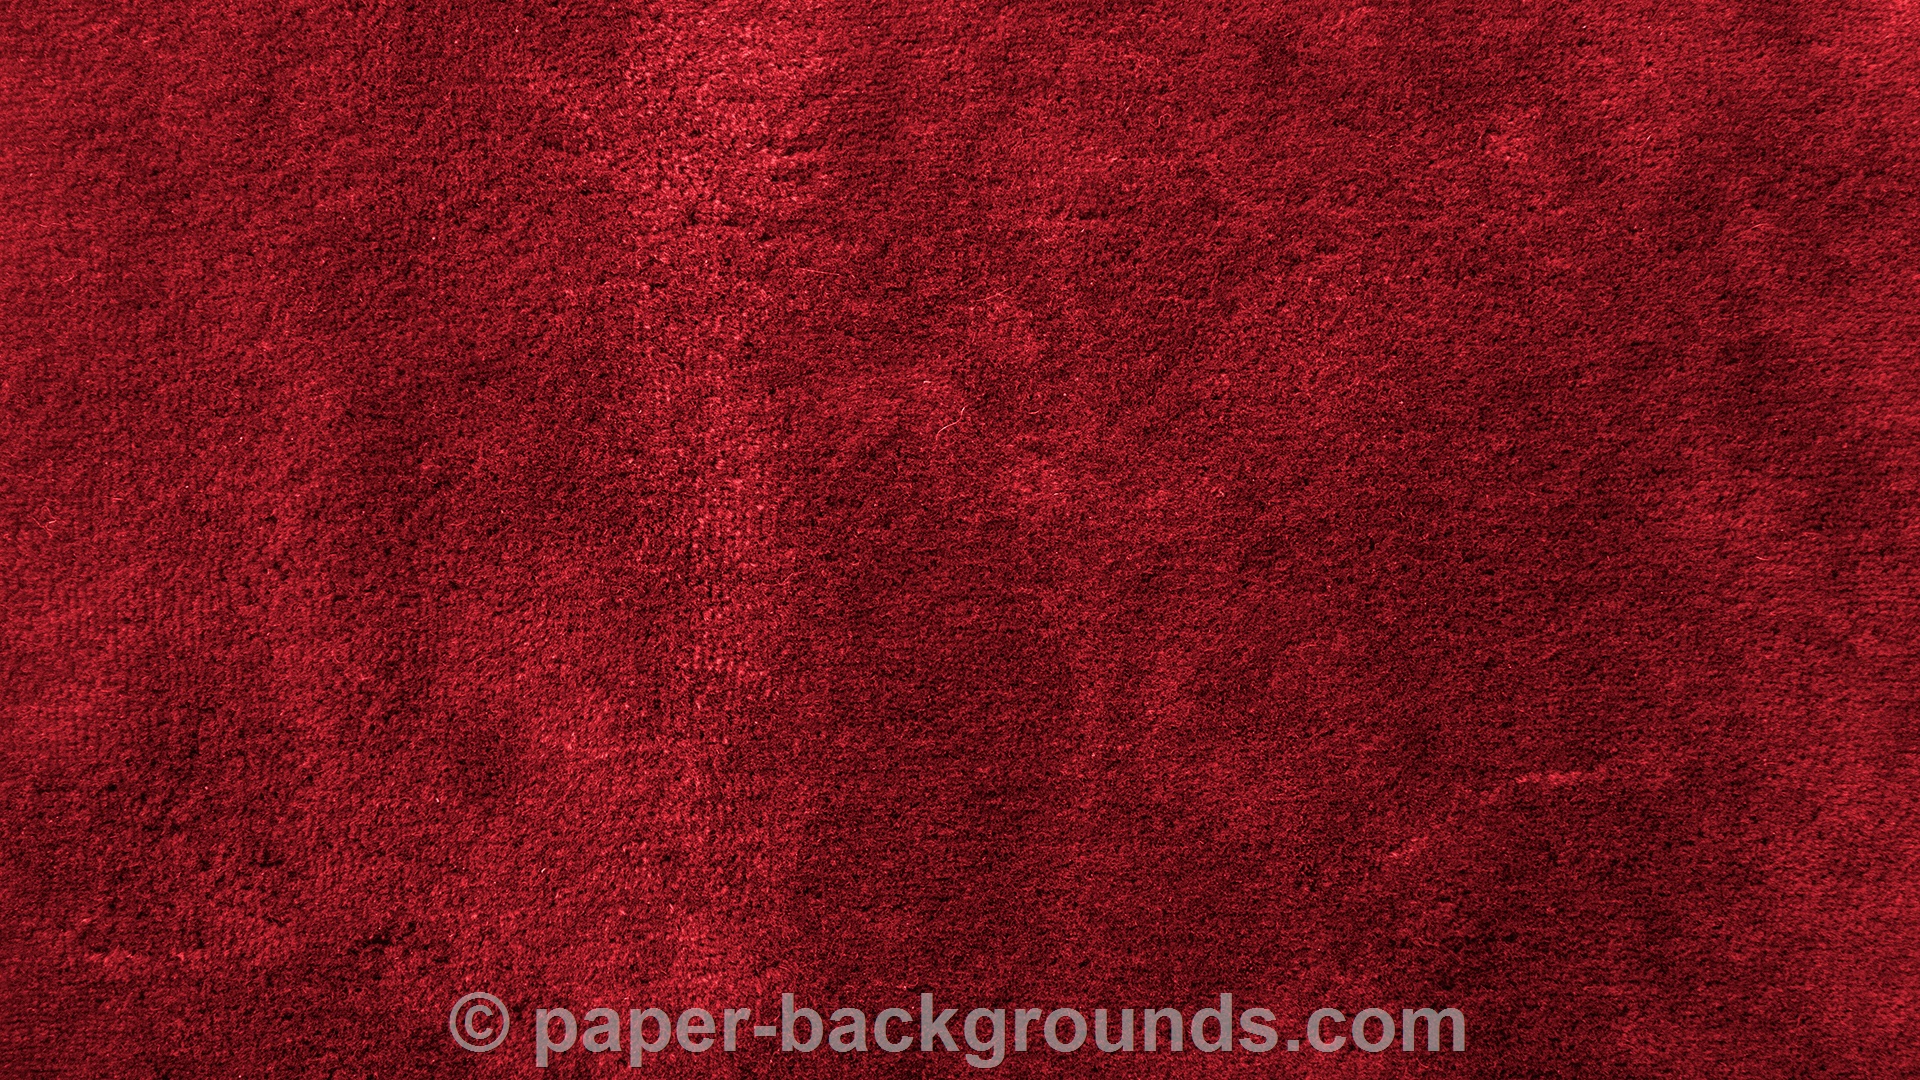 Paper Background Red Velvet Texture Background HD